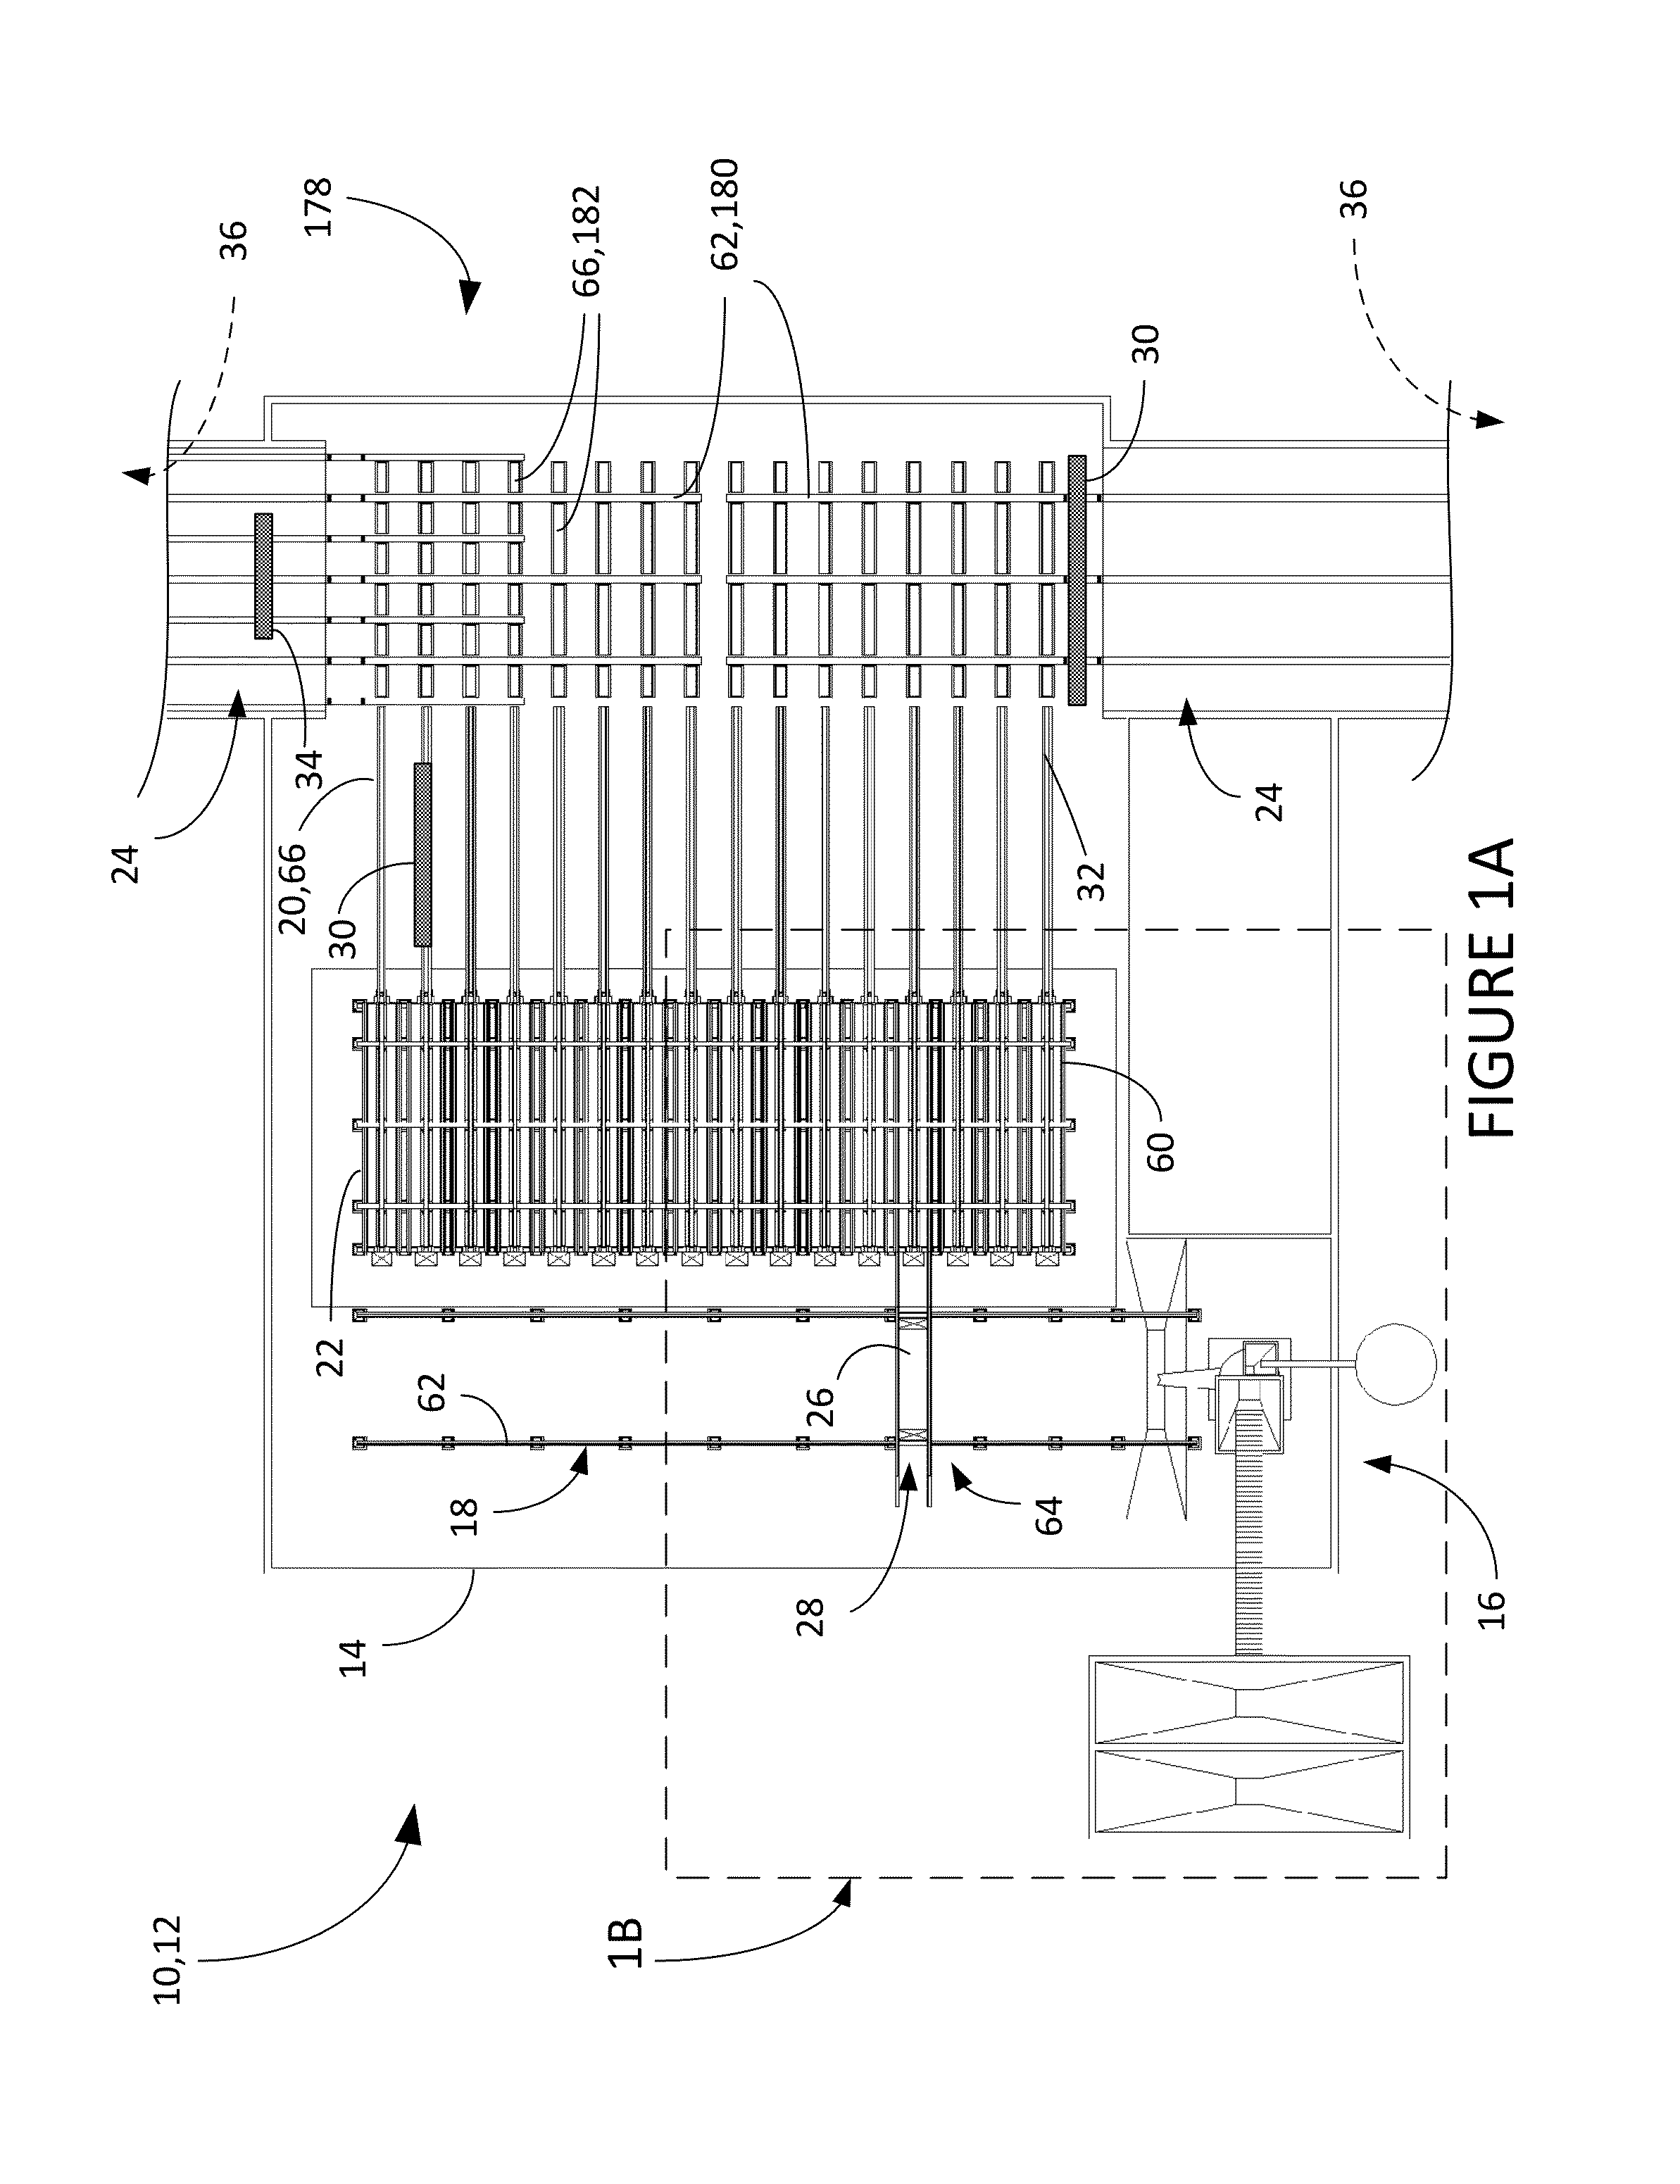 Concrete delivery subsystem for automated concrete fabrication system